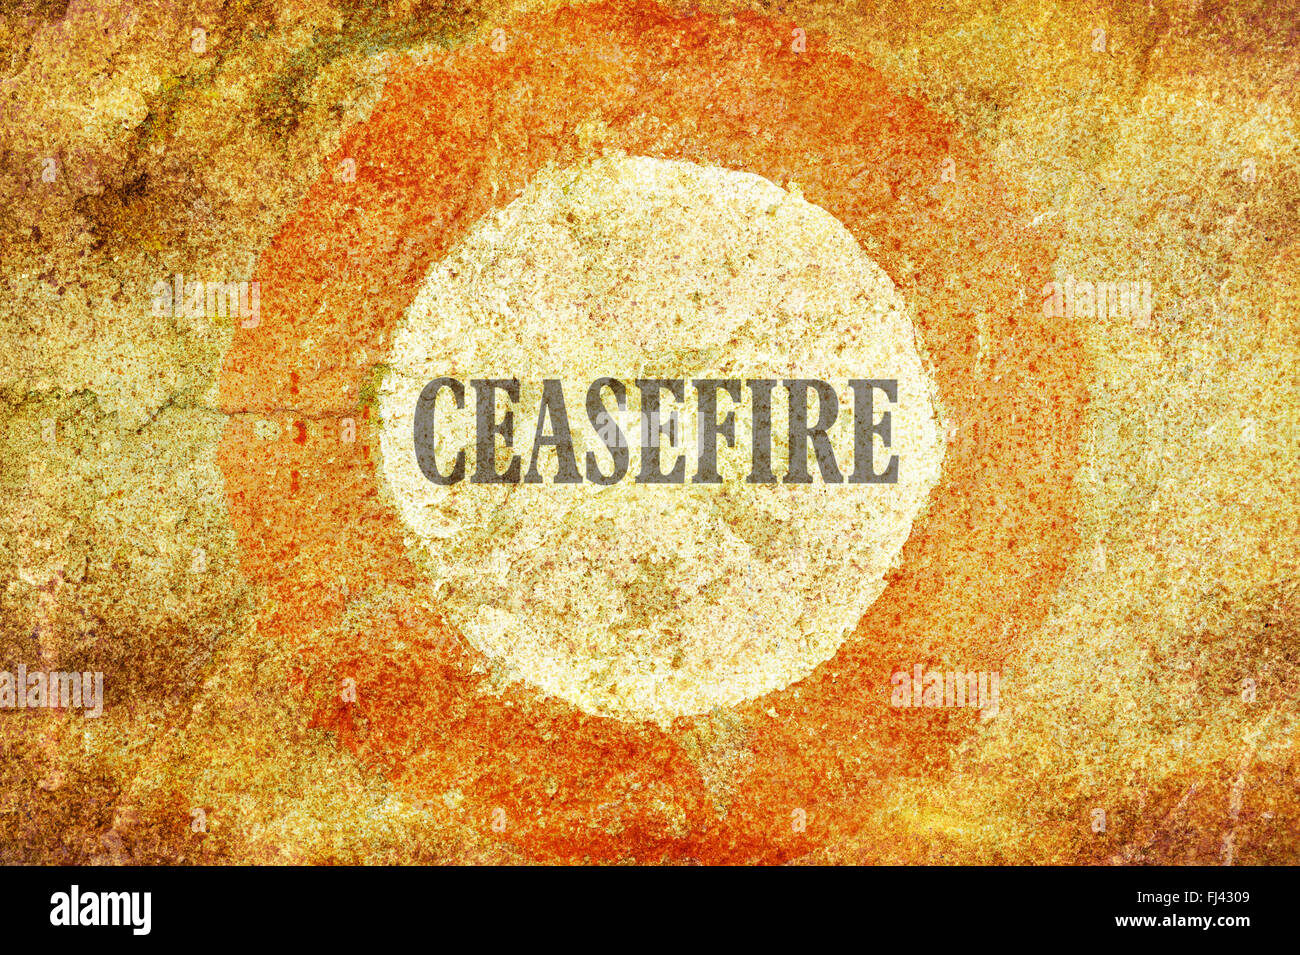 Single word Ceasefire written inside of a red circle on textured background Stock Photo